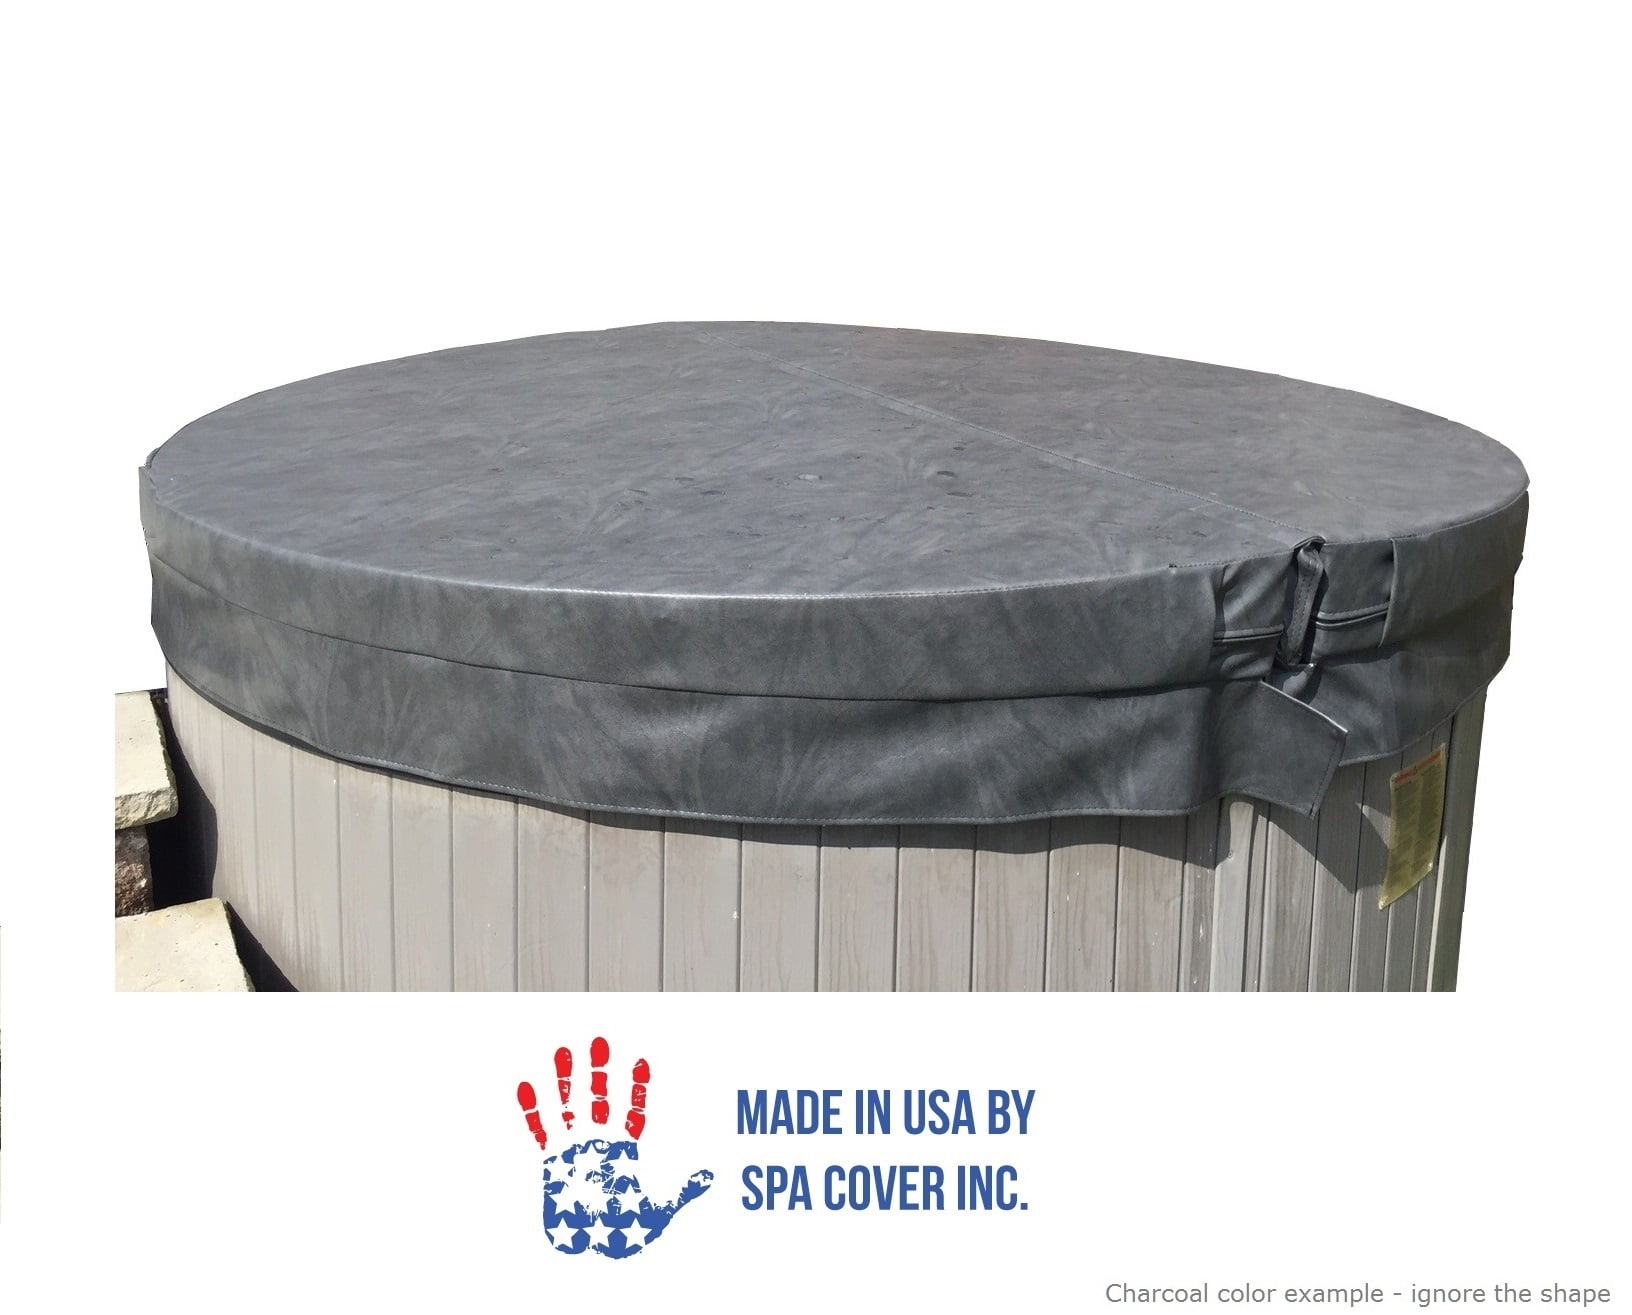 Caldera Tahitian 5" Spa Hot Tub Cover with FREE Shipping by BeyondNice 